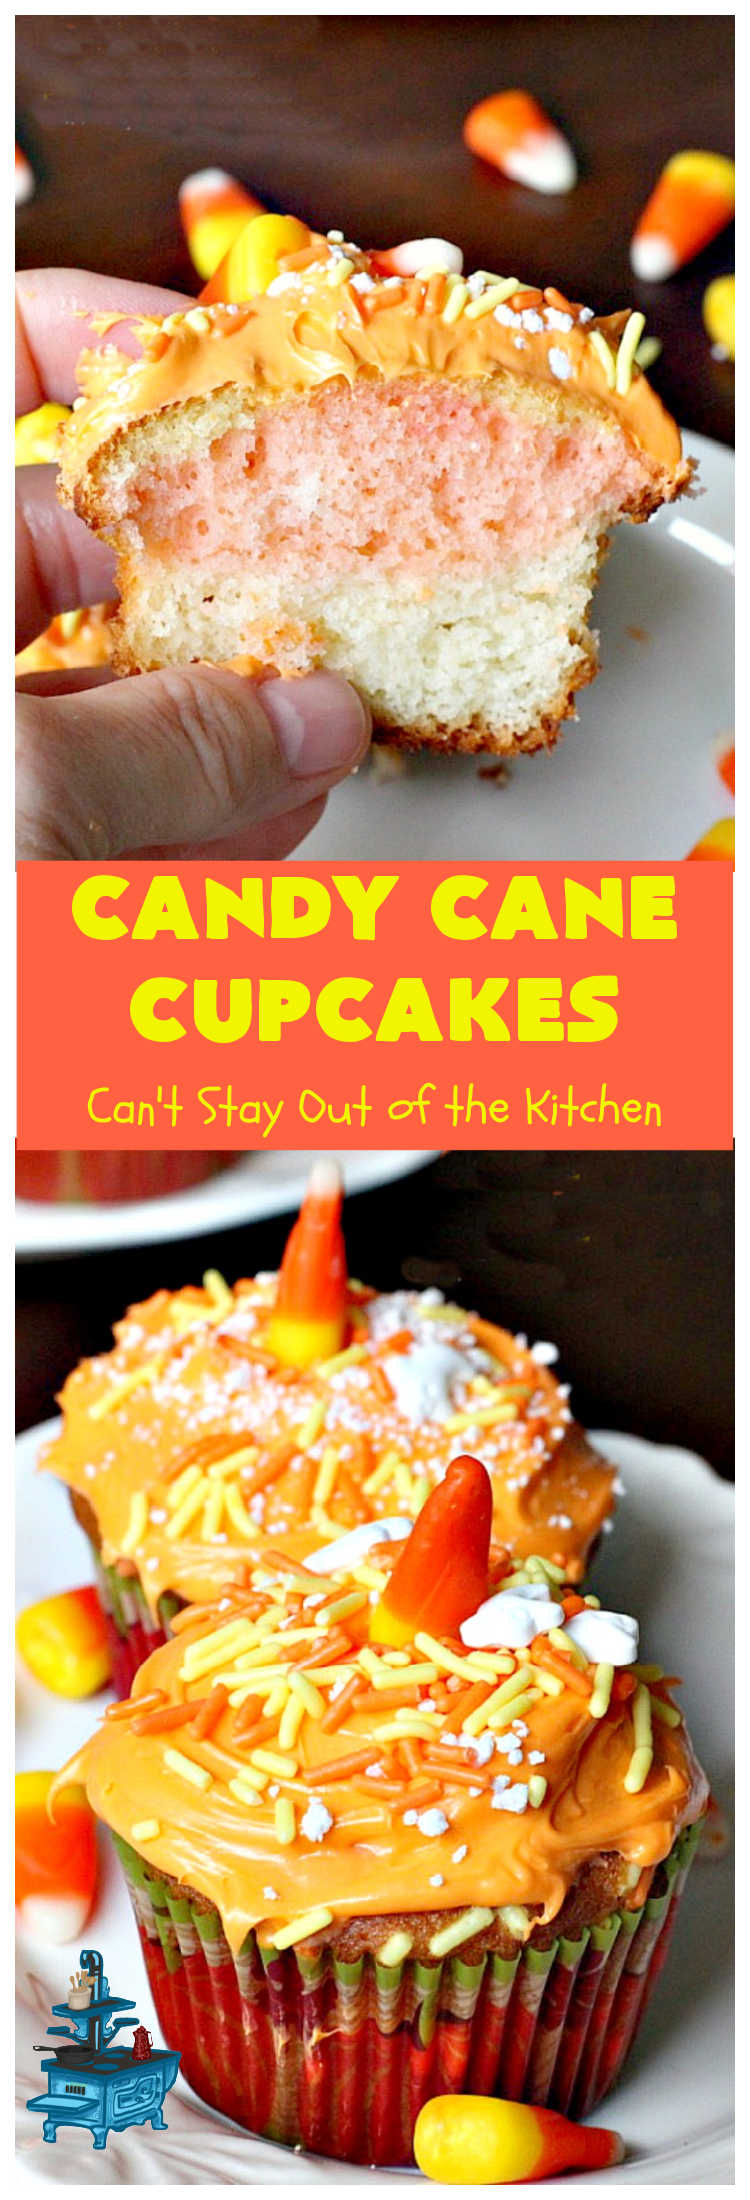 Candy Corn Cupcakes | Can't Stay Out of the Kitchen | these adorable #cupcakes are made with #CandyCorns and are a great way to use up leftover #Halloween candy! #dessert #HalloweenDessert #CandyCornCupcakes